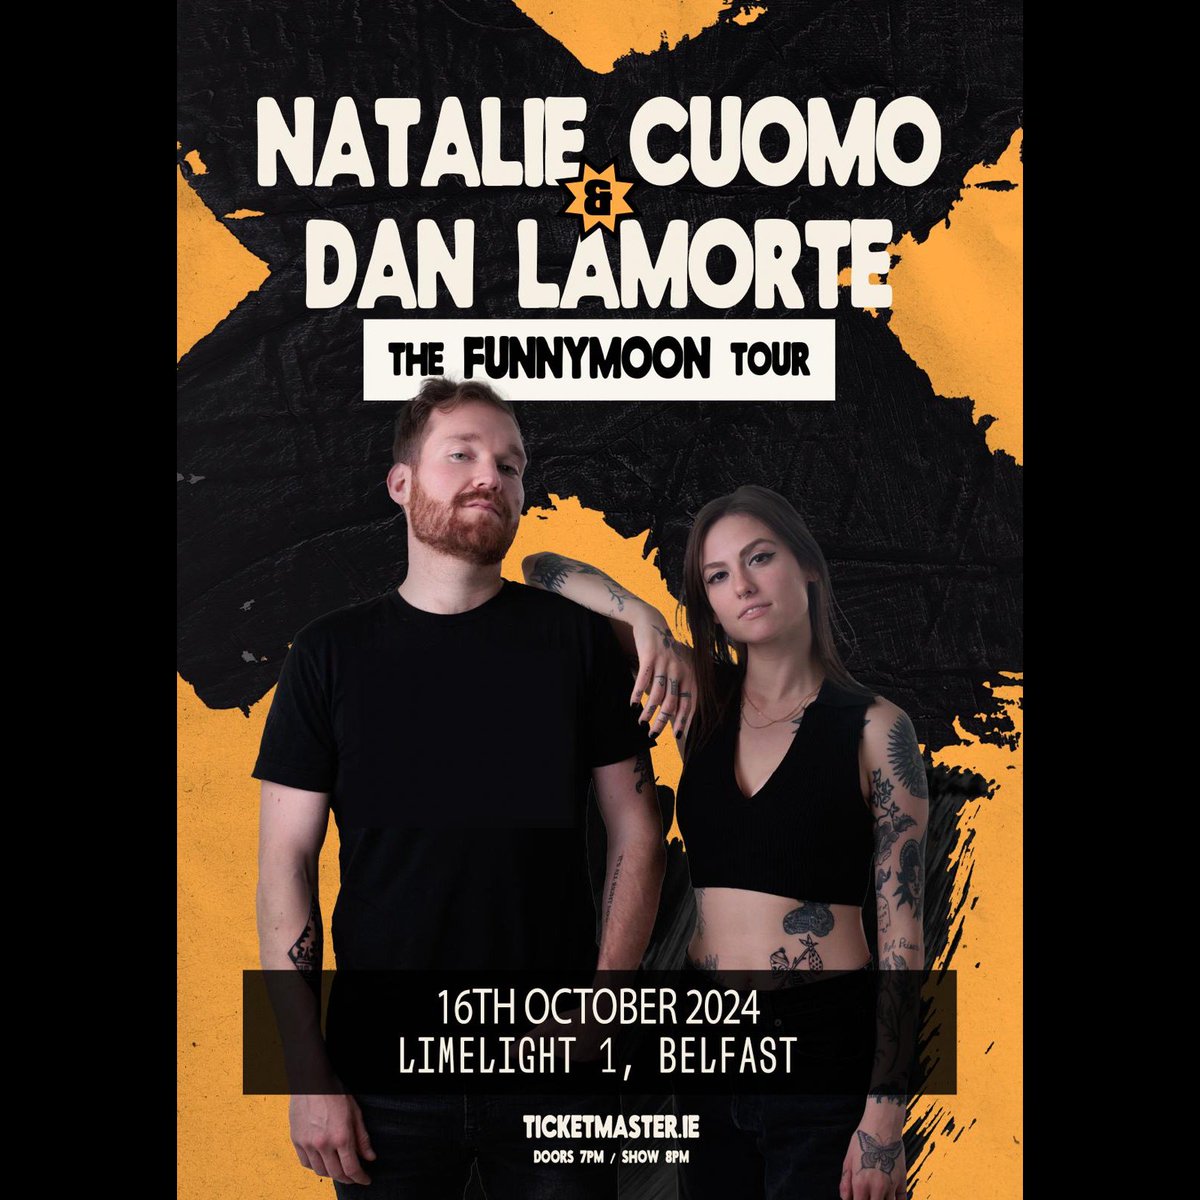 𝗡𝗘𝗪 𝗦𝗛𝗢𝗪 NYC comedians @NatalieCuomo & @DanLaMorte have announced The FUNNYMOON Tour will stop at The Limelight on Wed 16th October! 🎭 𝗦𝗜𝗚𝗡 𝗨𝗣 for pre-sale access (Wed 10am) 👉🏼 bit.ly/NCDMSignUp 𝗚𝗘𝗡𝗘𝗥𝗔𝗟 𝗢𝗡-𝗦𝗔𝗟𝗘 Fri at 10am